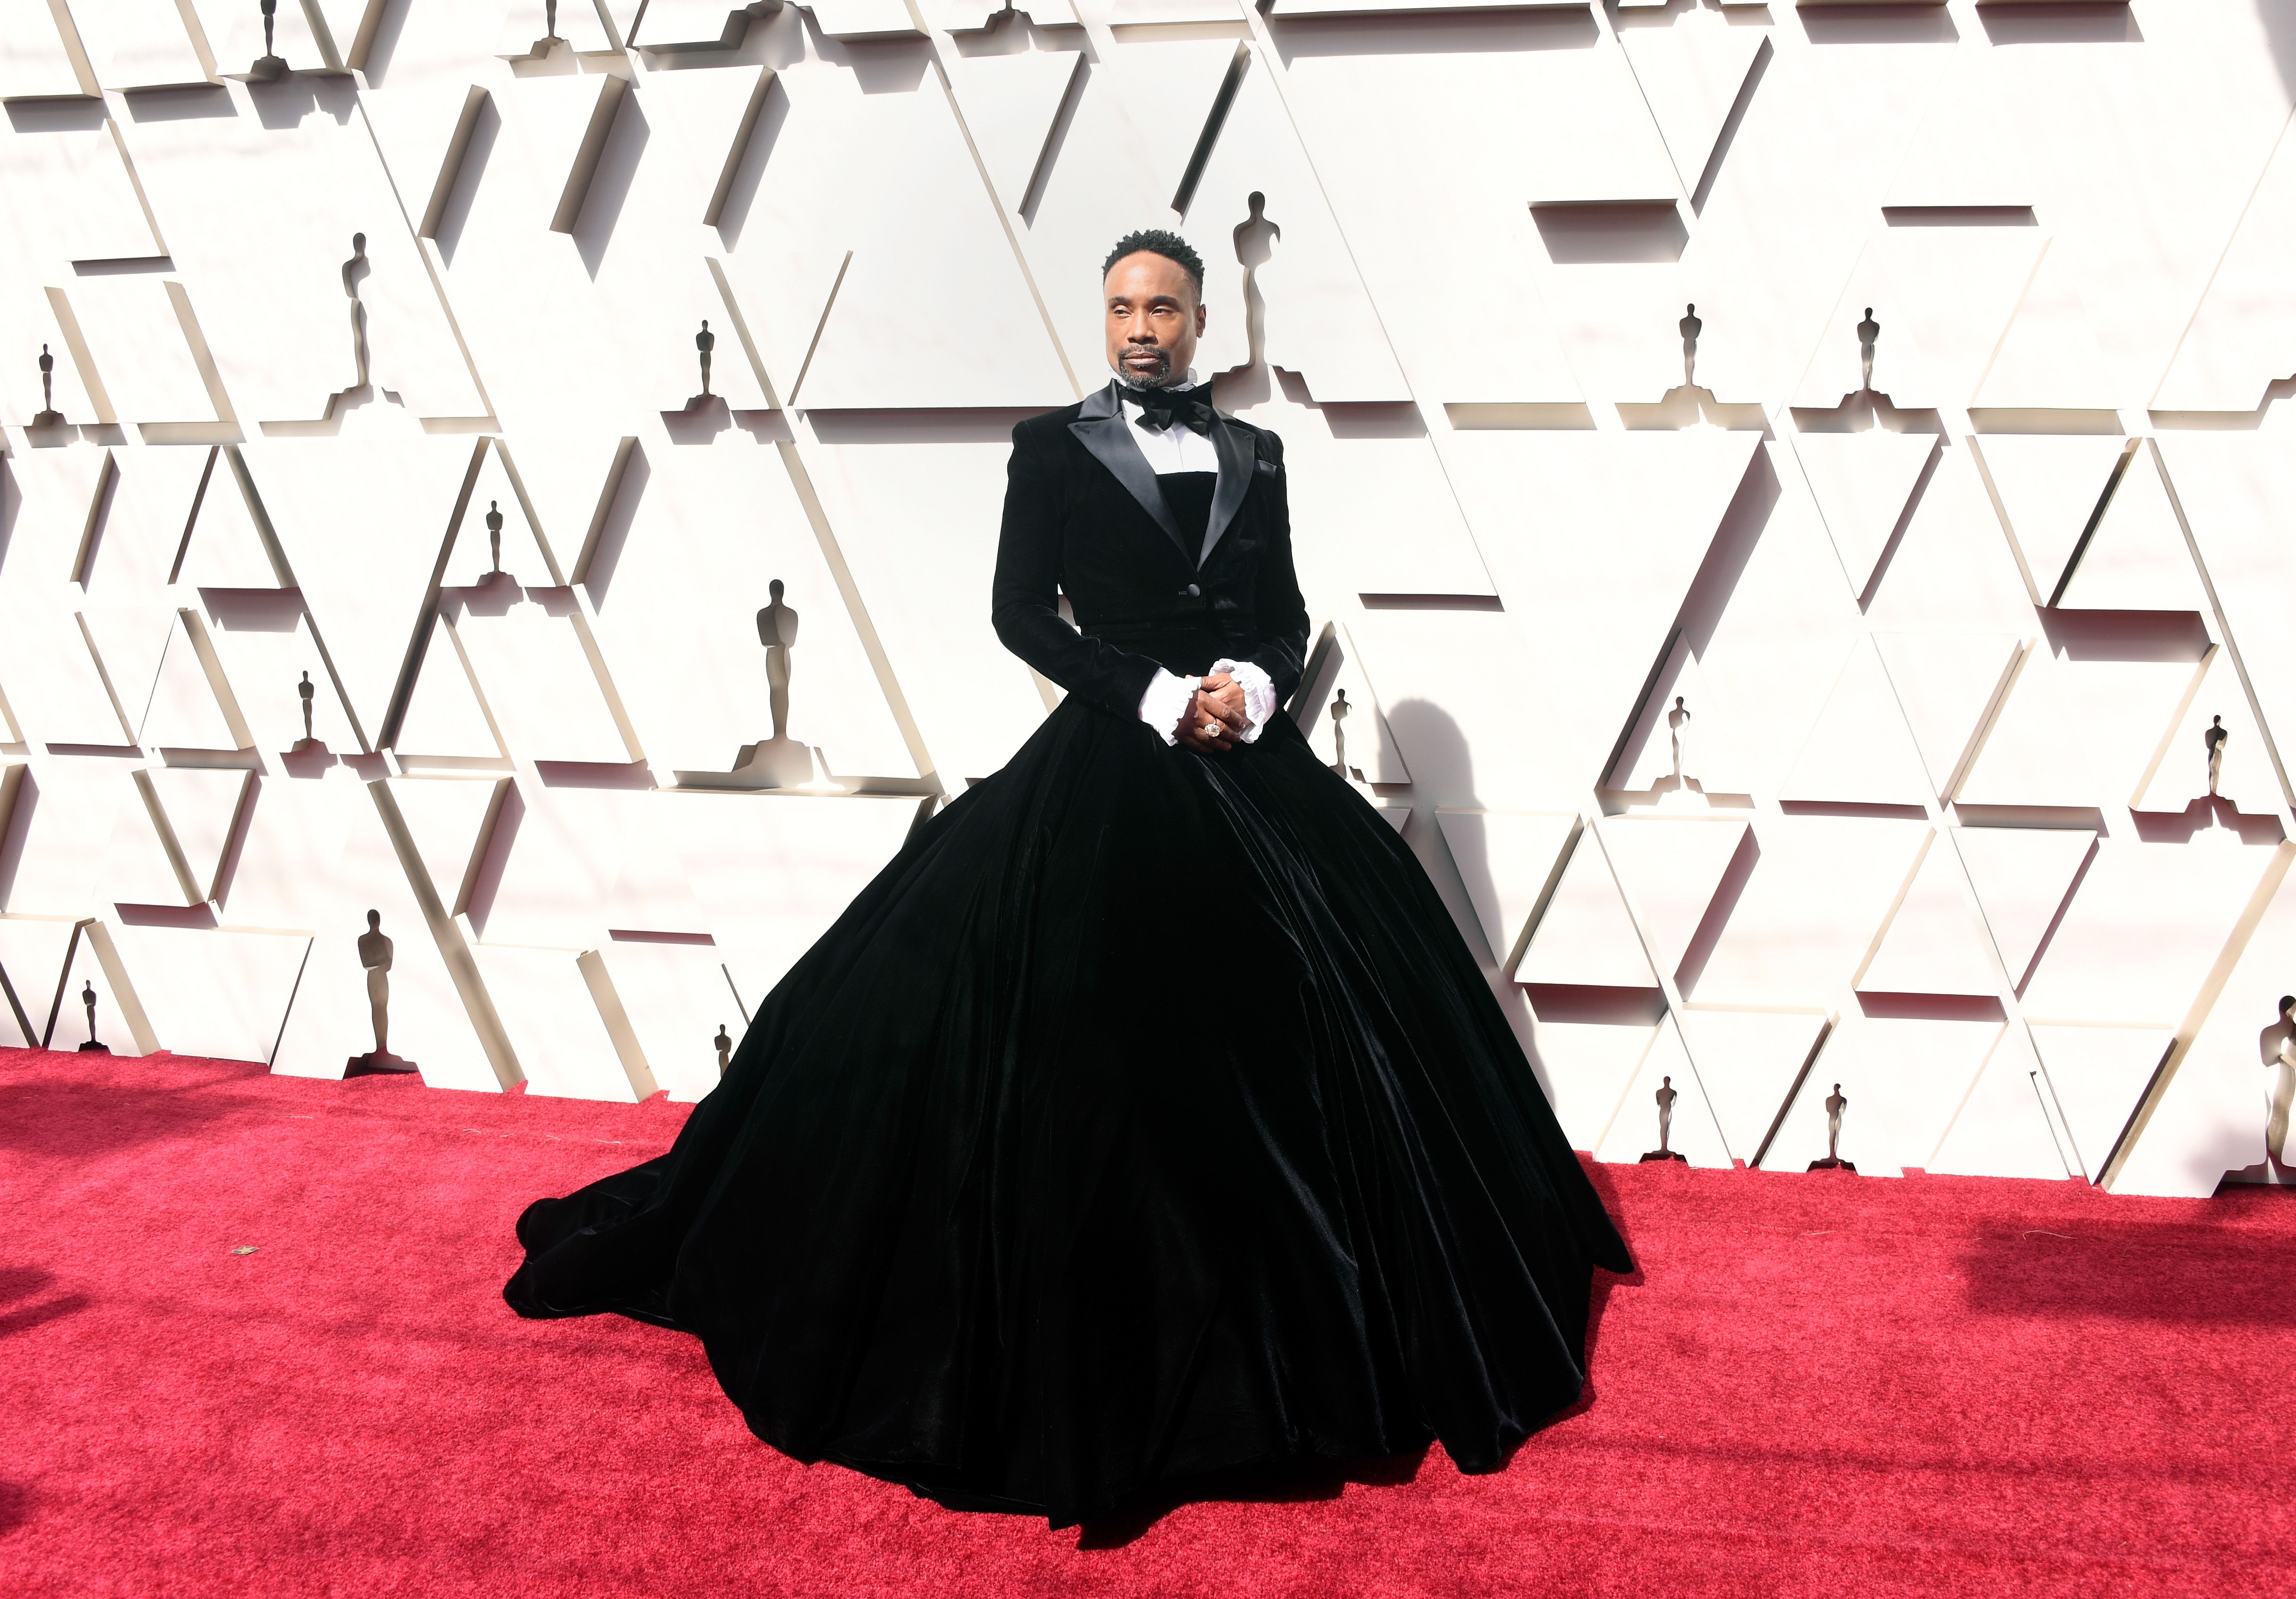 Billy Porter's Pose Character's Fate Was First Planned in Season 2